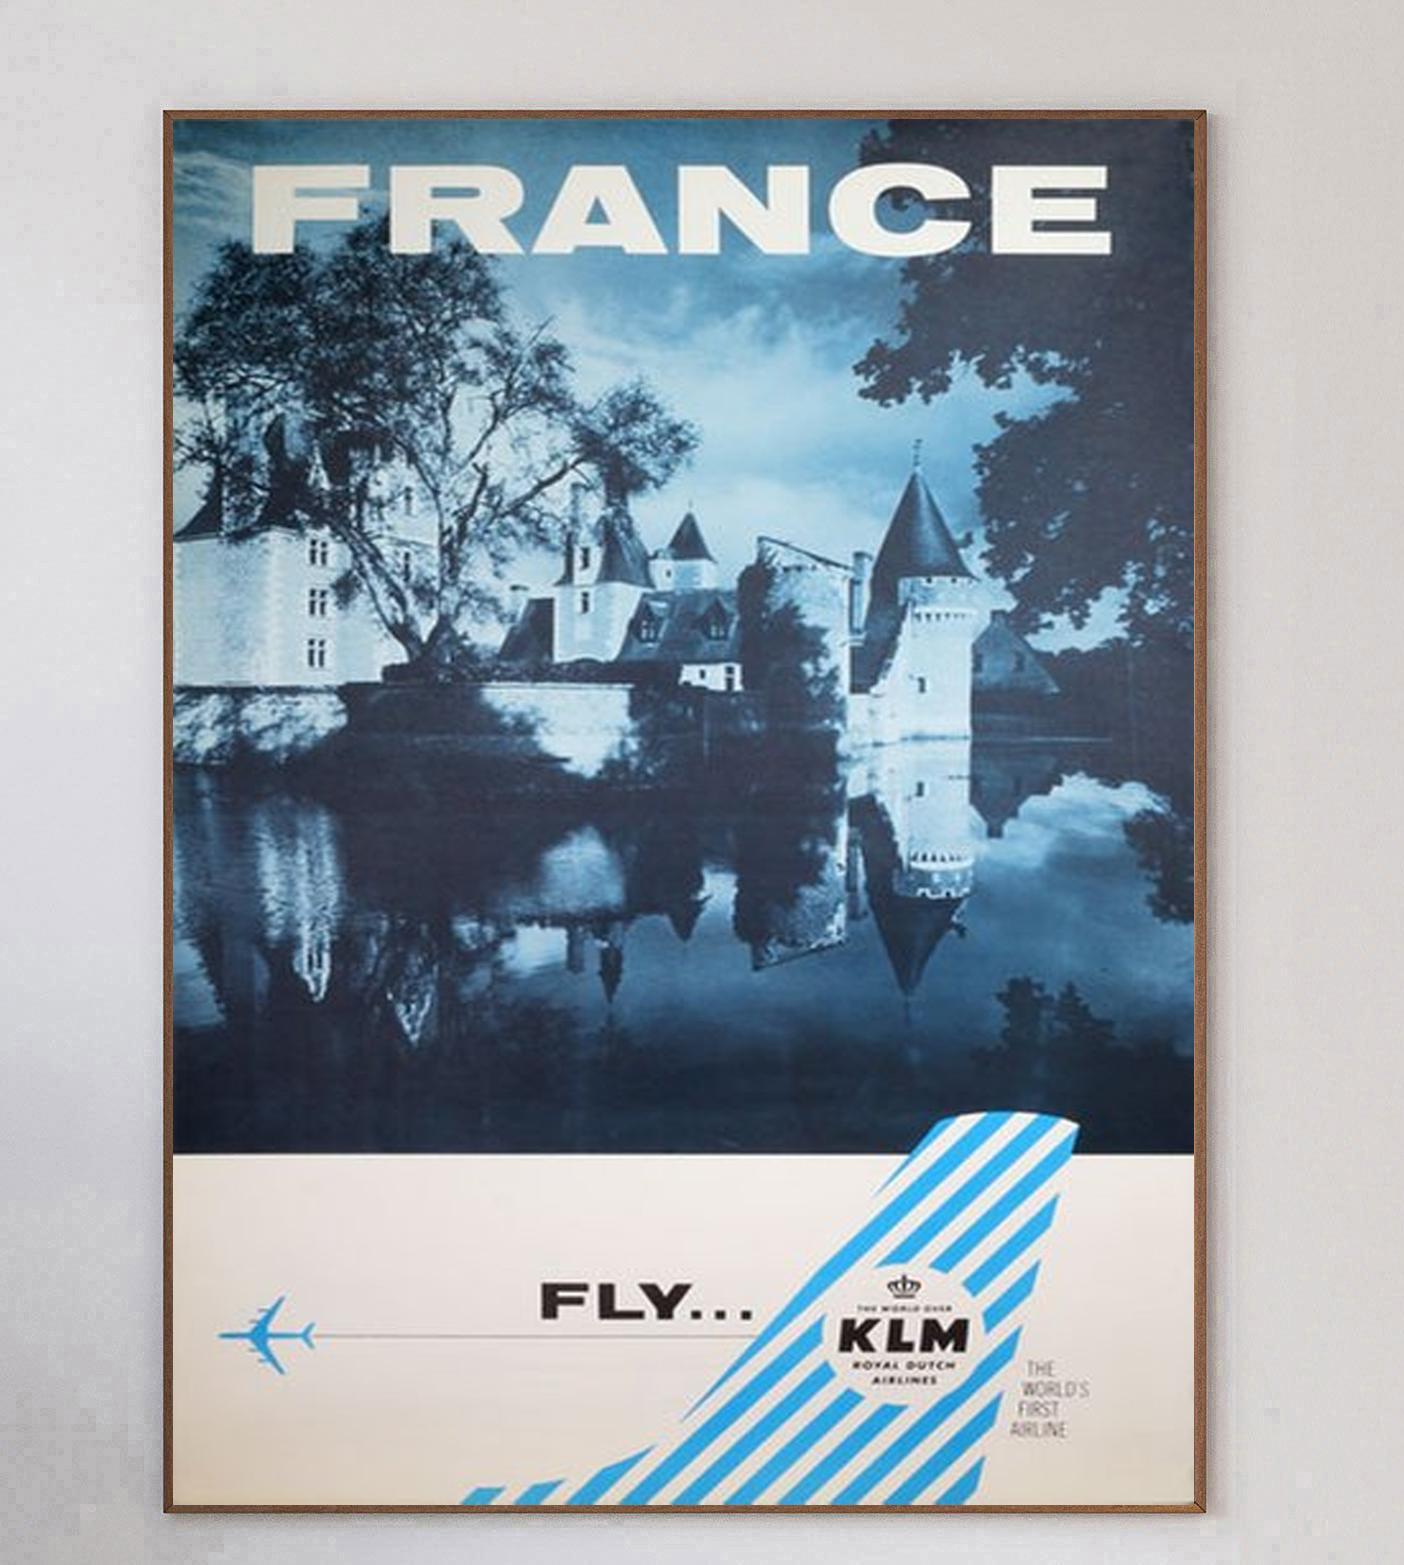 With fabulous artwork from French artist Guy Georget who worked on many Air France posters of the era, this poster promoting the airlines routes to Mexico was created in 1962. Air France was created in 1933 after a merger of multiple French airlines